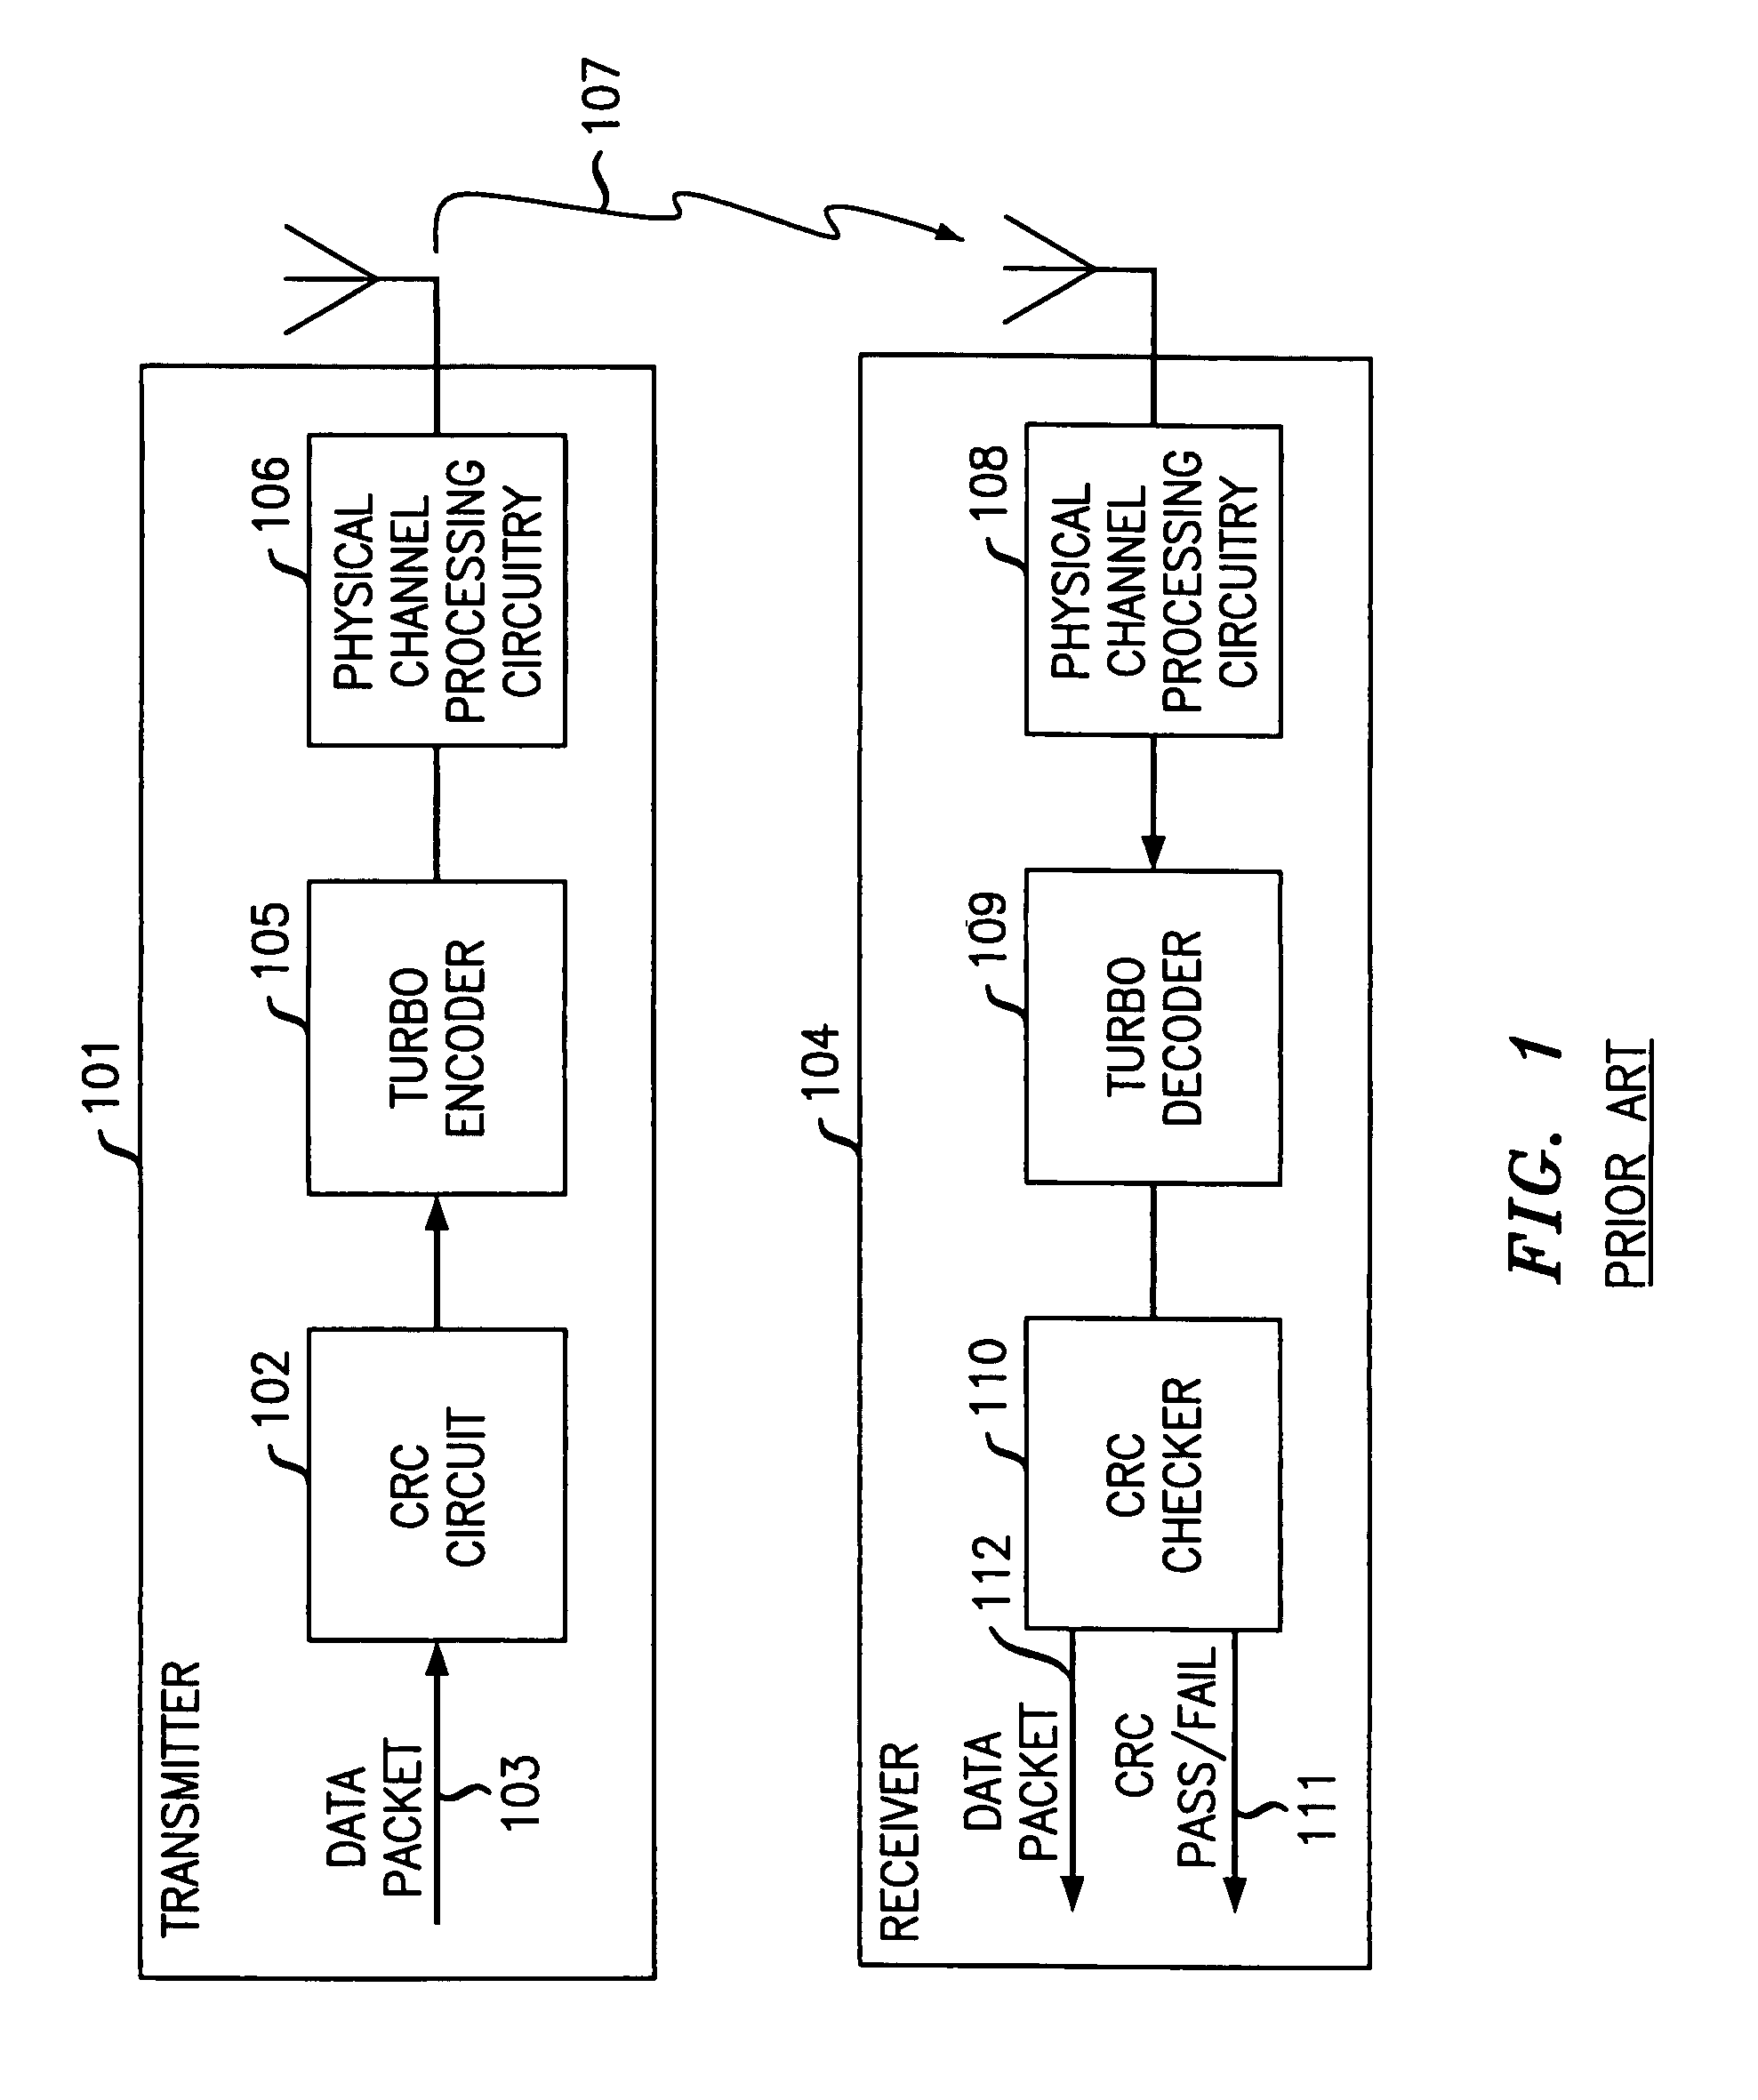 Method and apparatus for detecting a packet error in a wireless communications system with minimum overhead using embedded error detection capability of turbo code